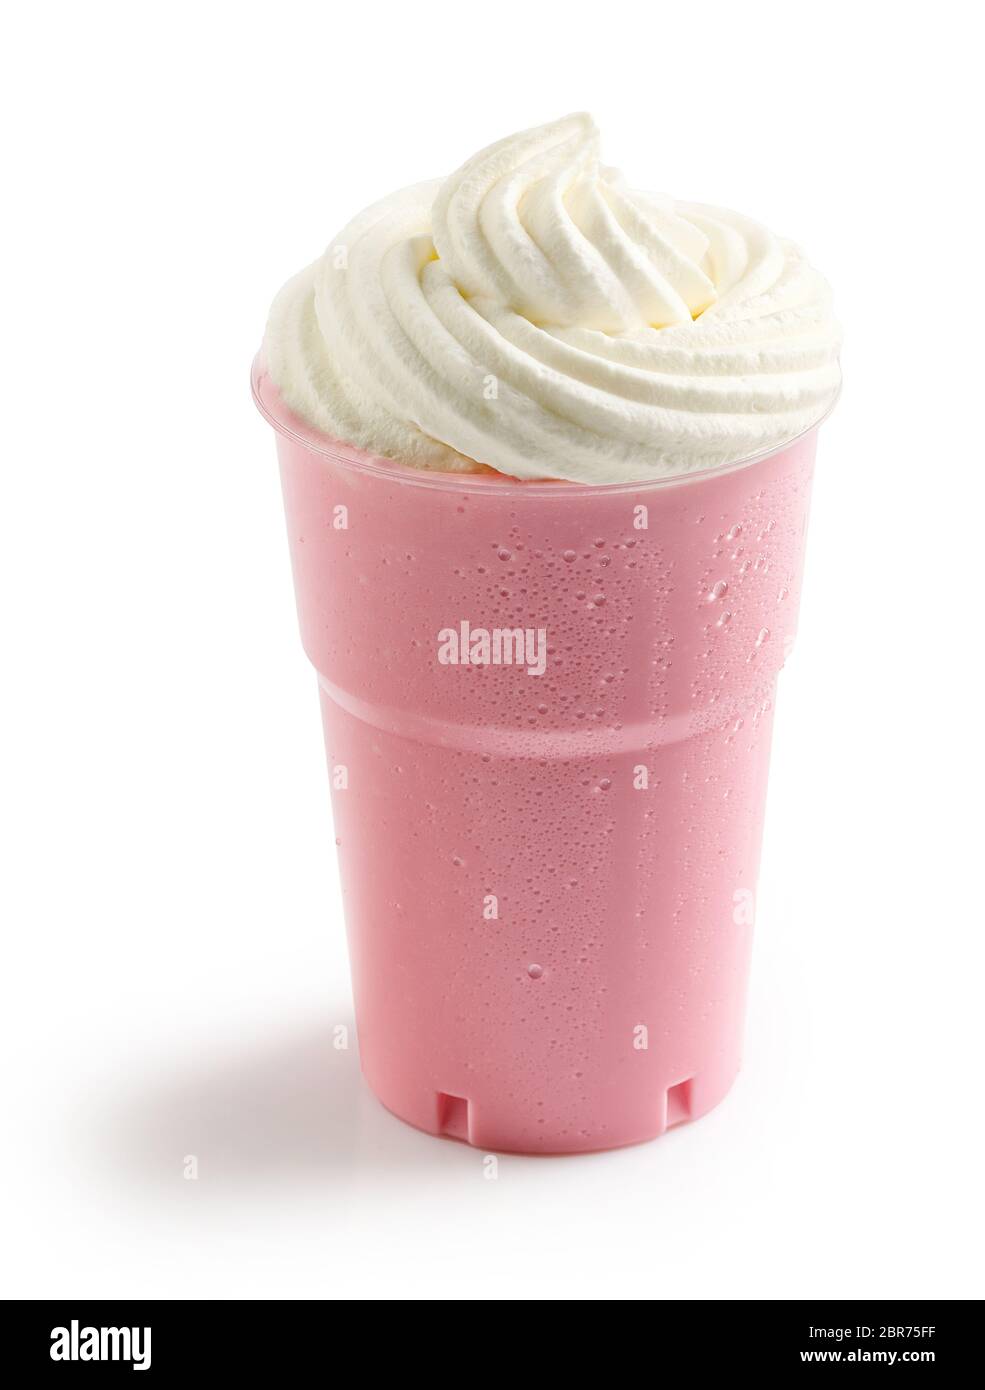 https://c8.alamy.com/comp/2BR75FF/pink-strawberry-milkshake-with-whipped-cream-in-plastic-take-away-cup-isolated-on-white-background-2BR75FF.jpg